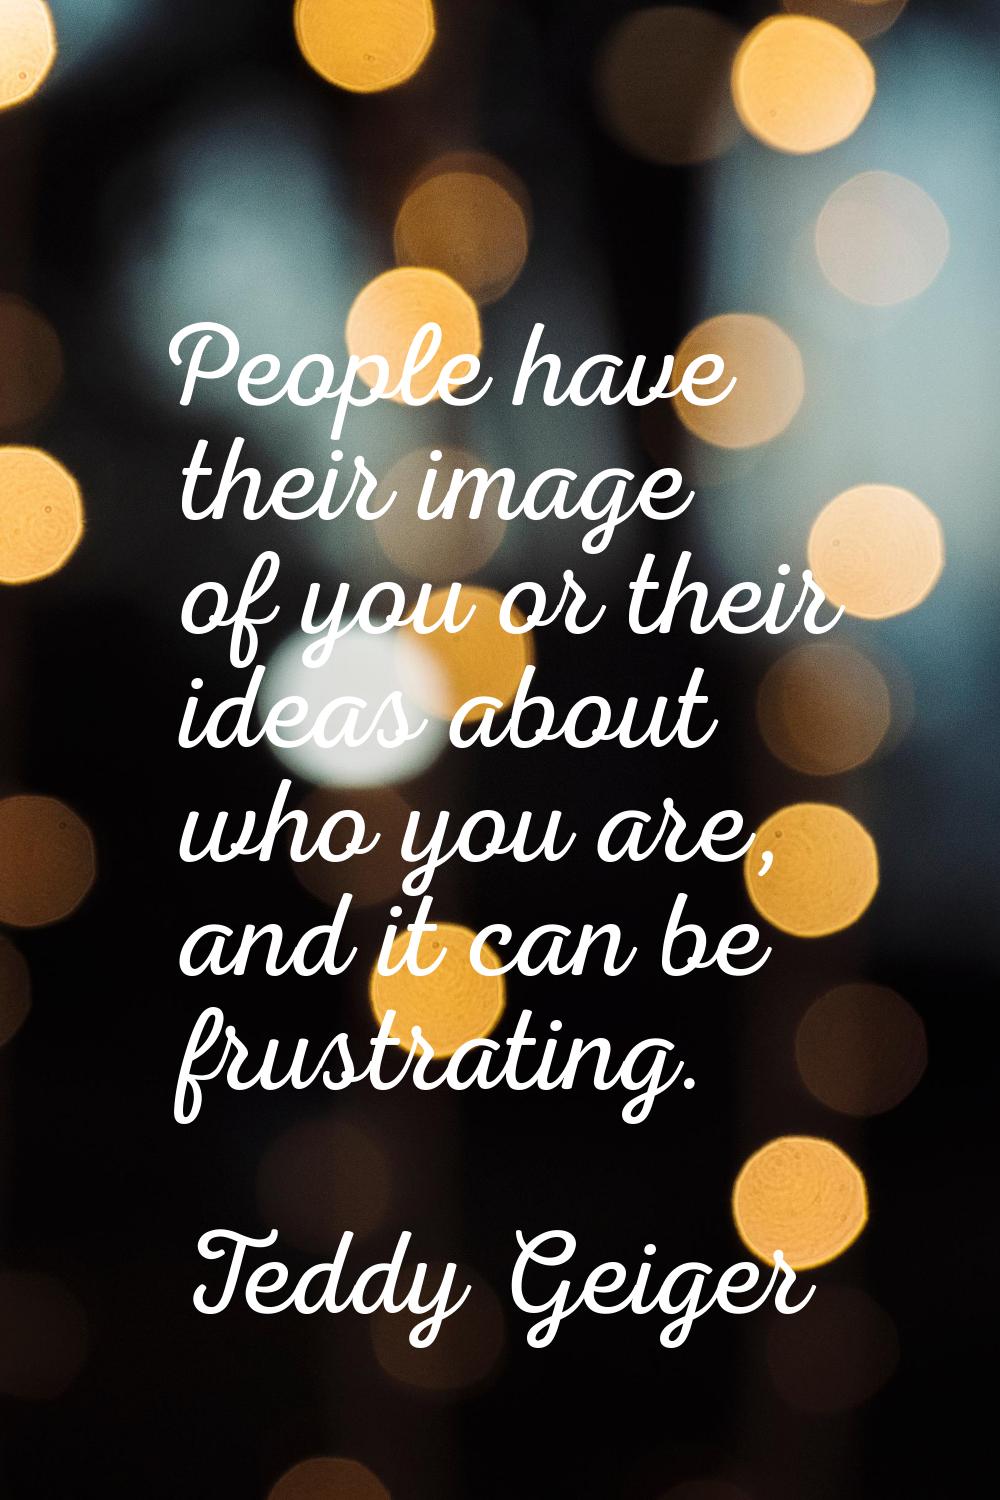 People have their image of you or their ideas about who you are, and it can be frustrating.